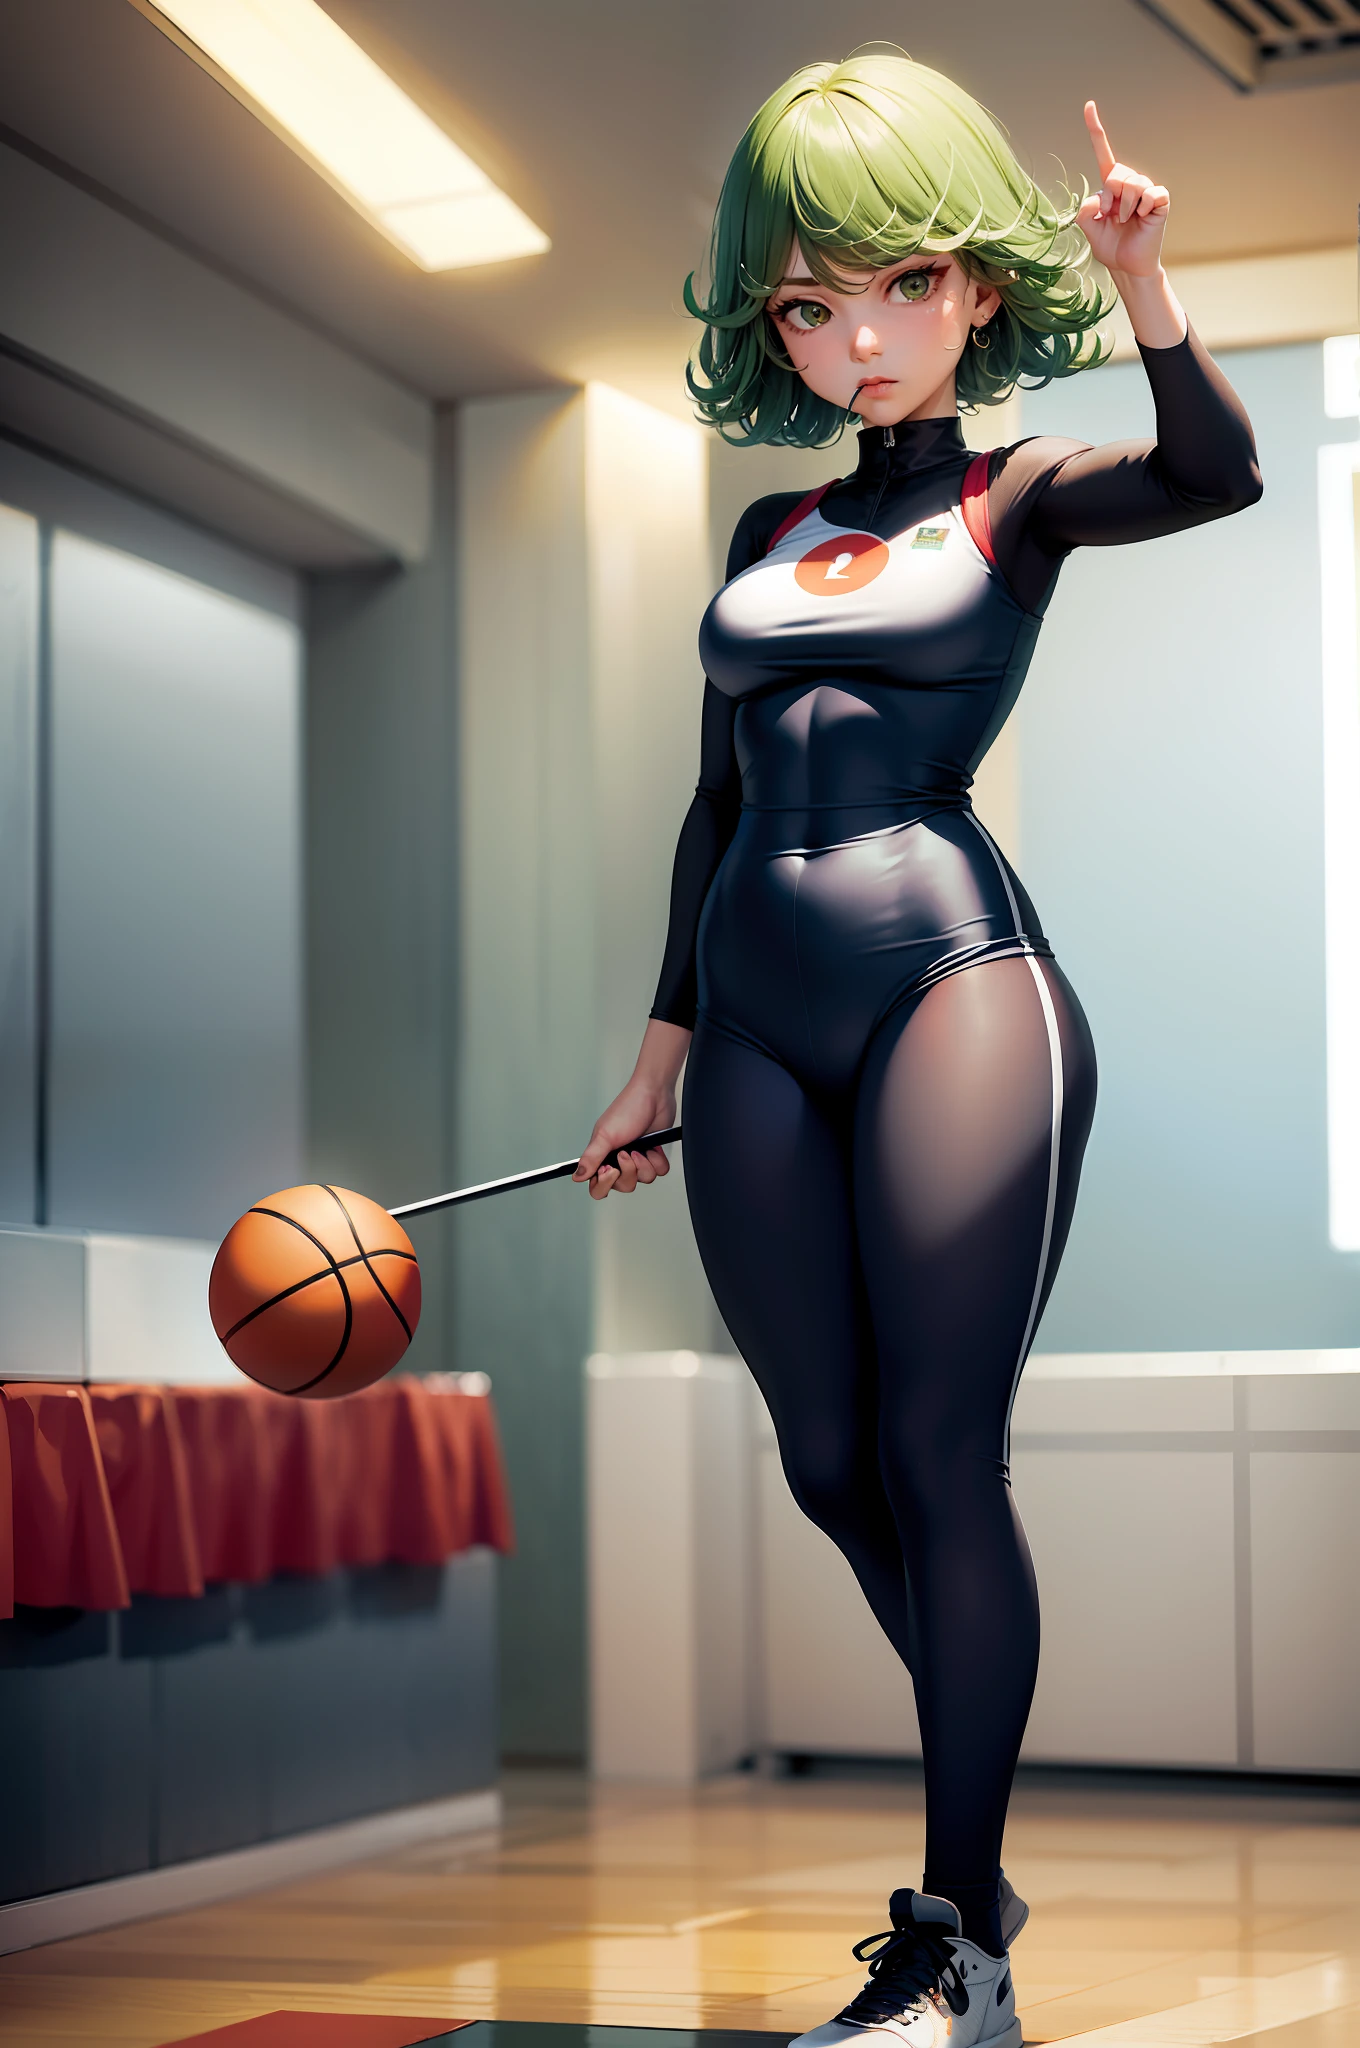 (Masterpiece, best quality: 1.2), solo, 1 girl, Tatsumaki, boring, mouth closed, looking at the audience, basketball in hand, standing on basketball court, medium breasts, loose basketball suit.